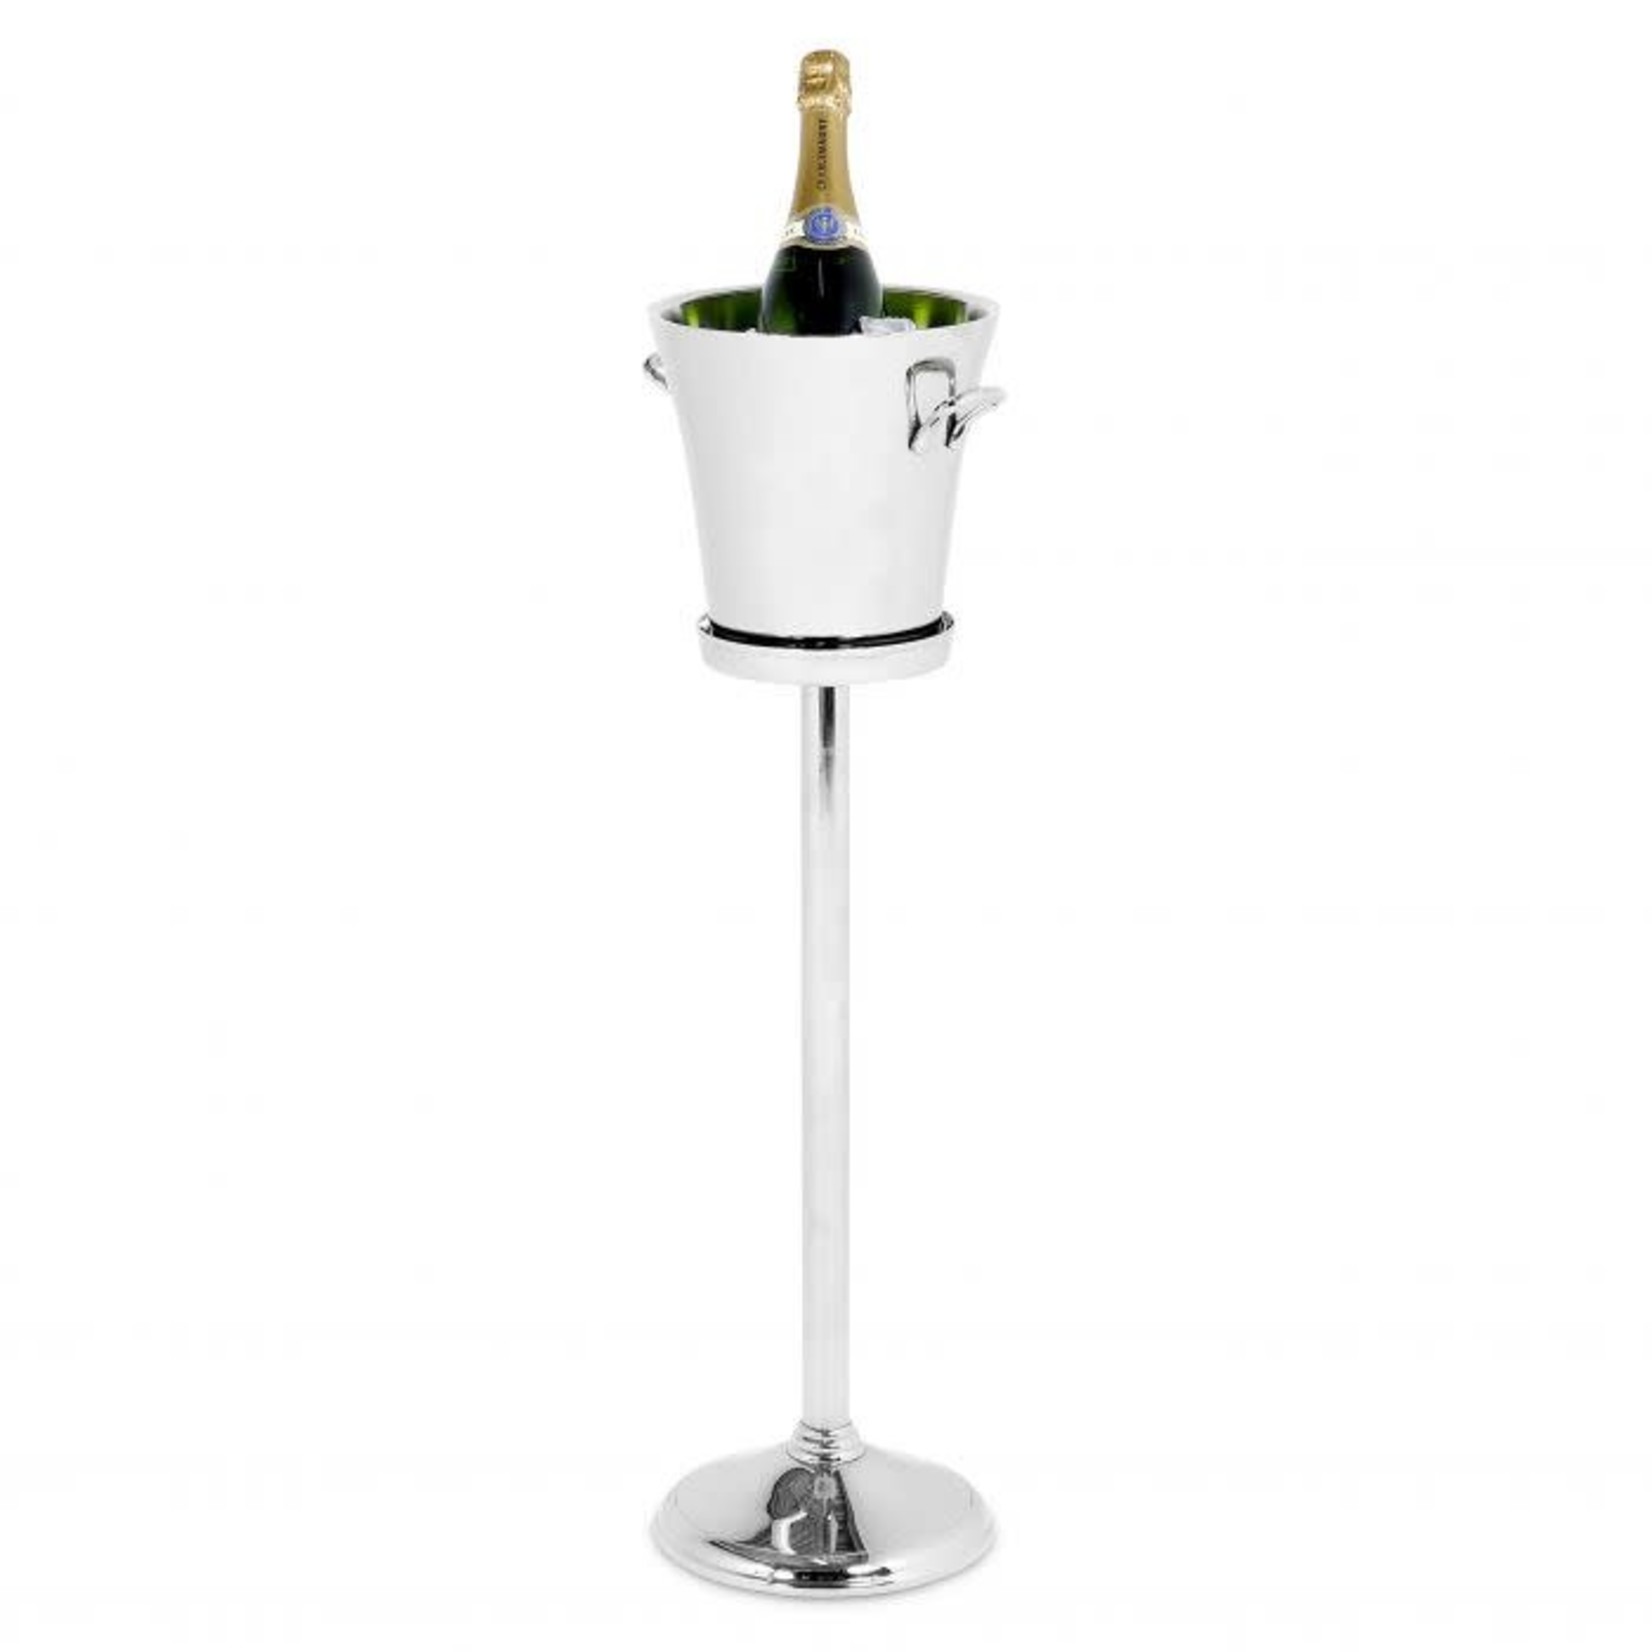 EICHHOLTZ WINE COOLER SELOUS NICKEL FINISH ON STAND